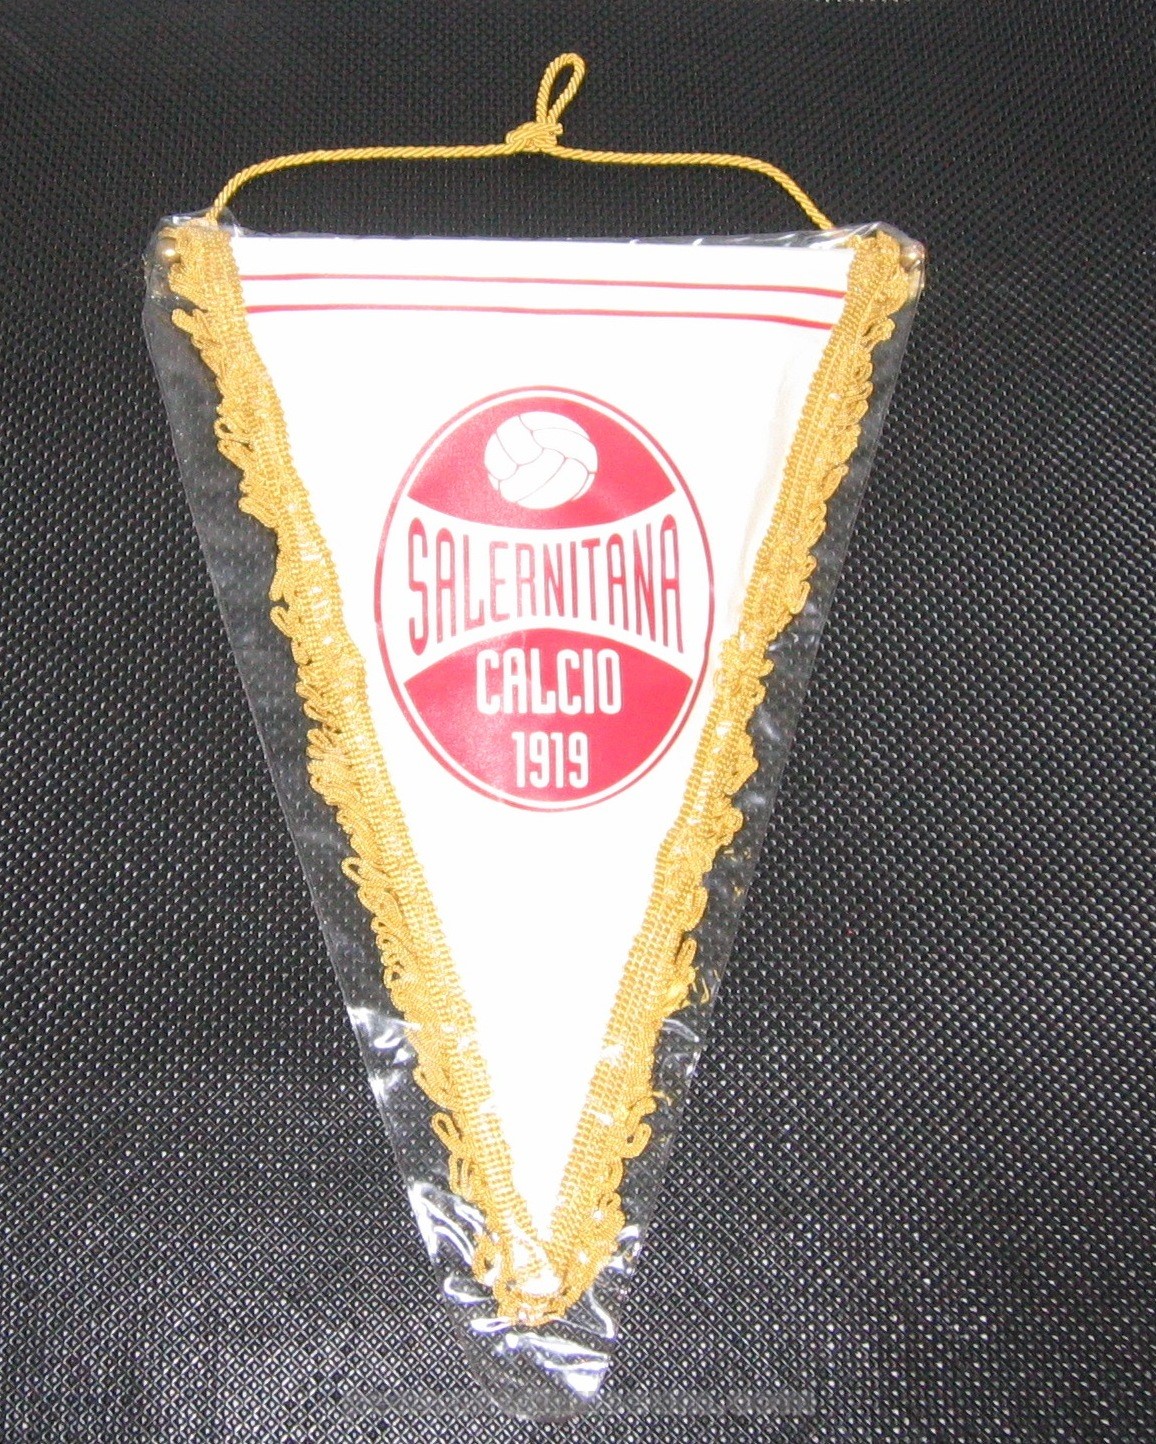 Printed pennant in use in the 2000s